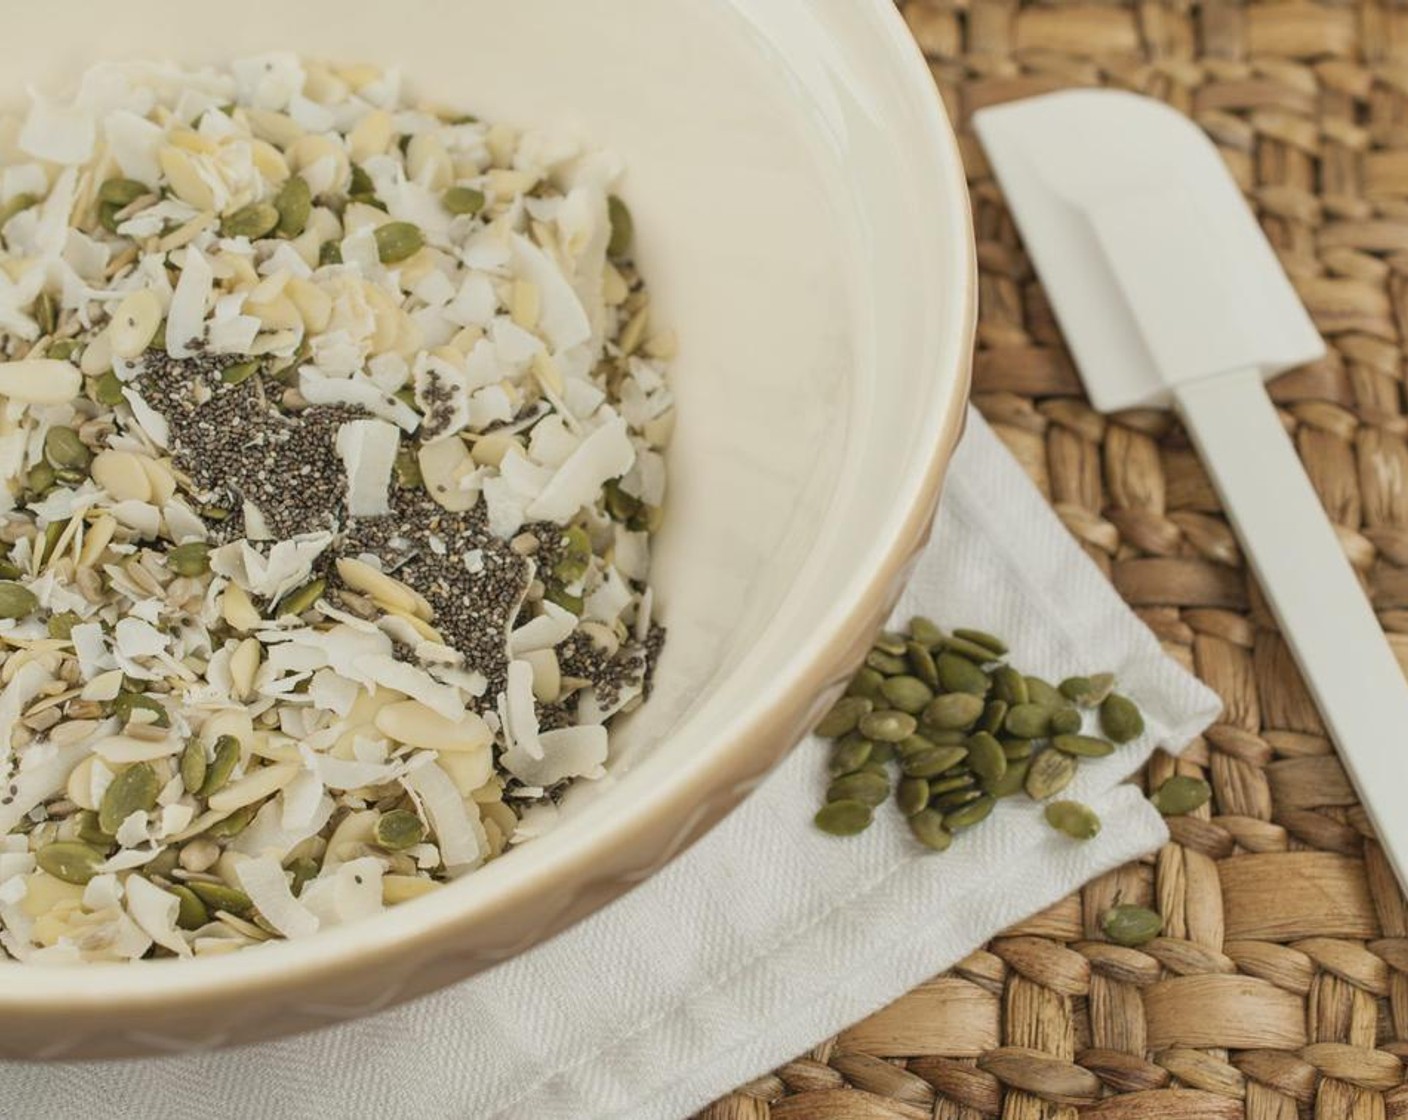 step 2 Add Unsweetened Coconut Flakes (2 cups), Sliced Almonds (1 cup), Pepitas (3/4 cup), Sunflower Seeds (1/2 cup), Chia Seeds (3 Tbsp), and Salt (1 pinch) to a large bowl. Drizzle with Corn Syrup (3/4 cup) toss gently to fully combine.